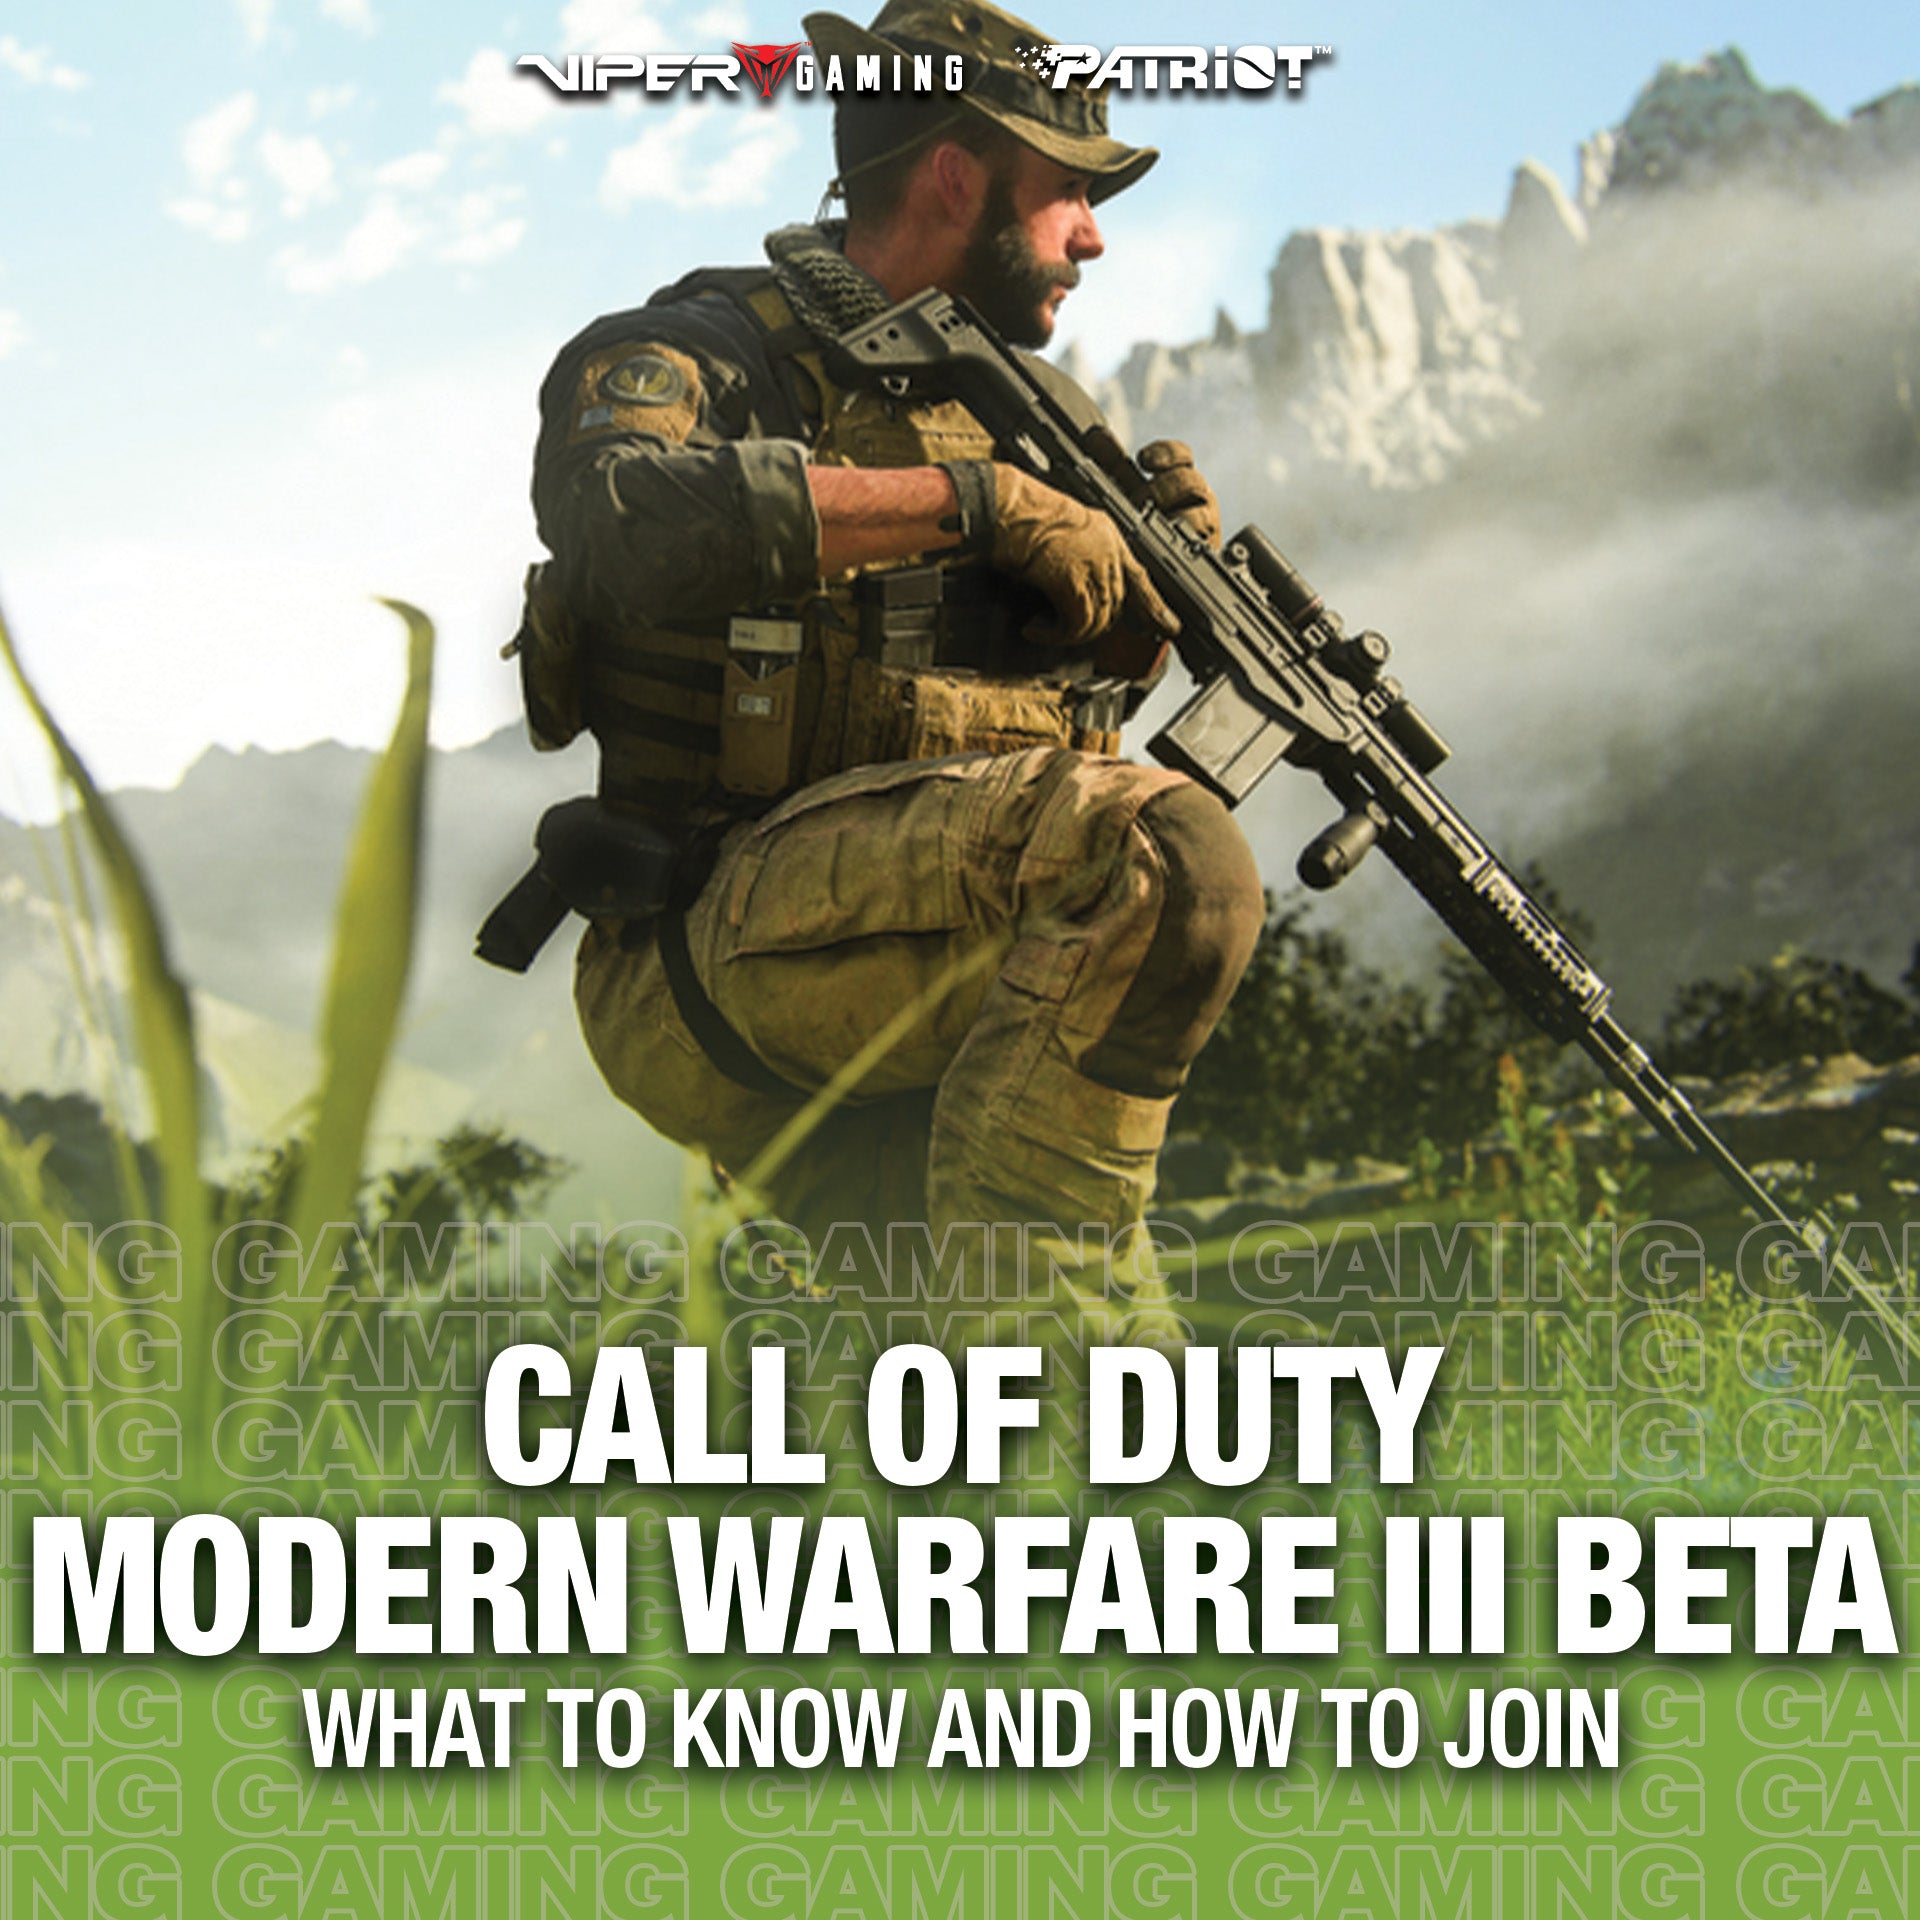 Call of Duty Modern Warfare 3 (2023) Beta: What to Know and How to Join